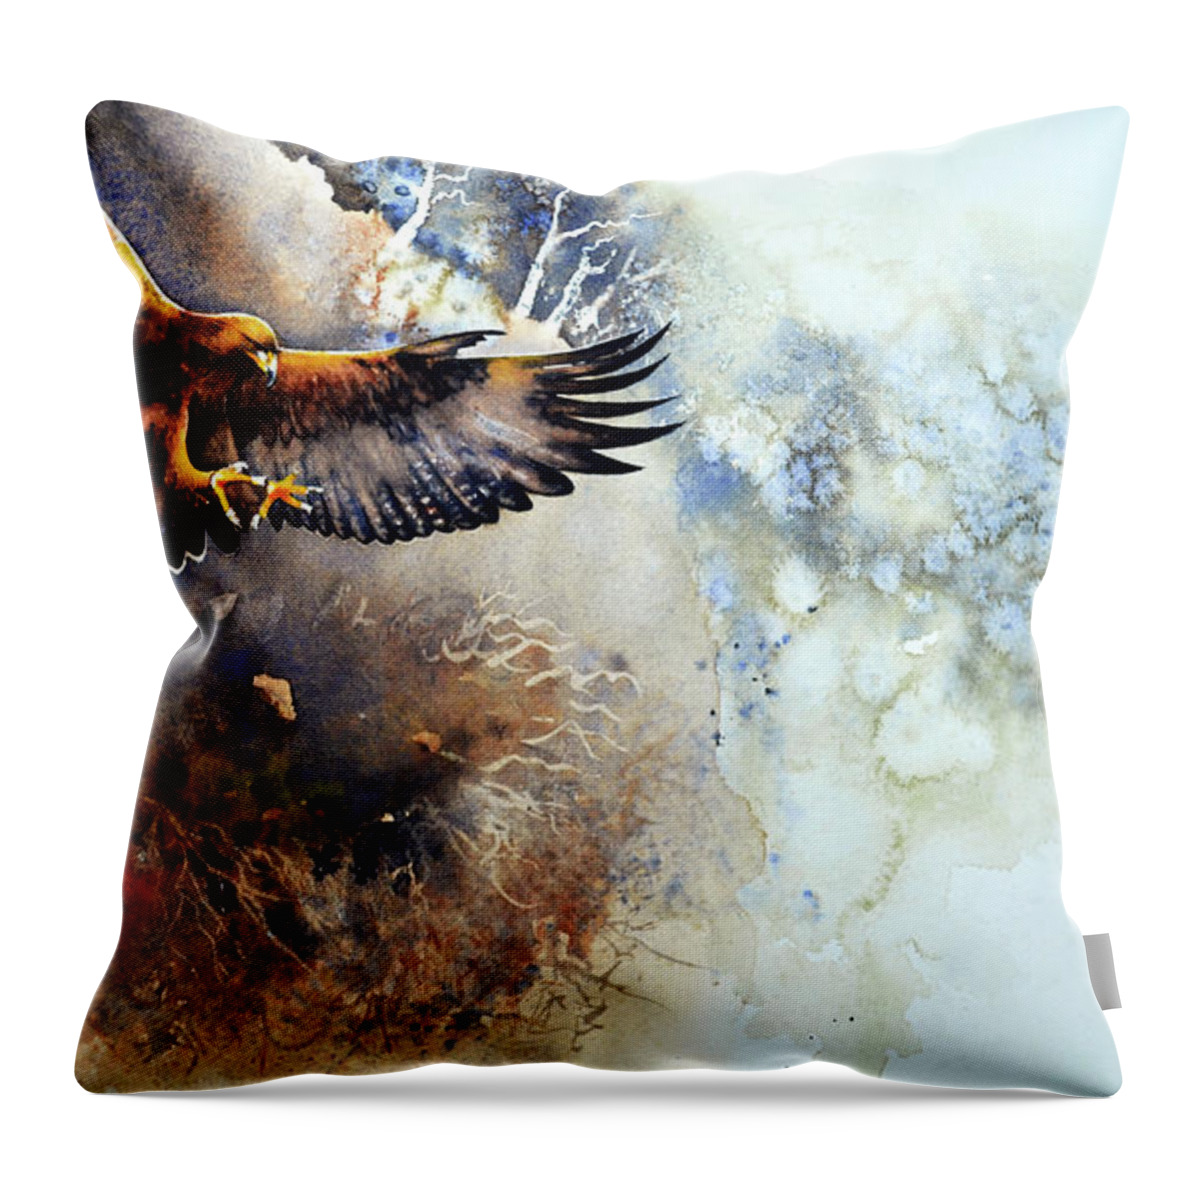 Golden Throw Pillow featuring the painting Eagle Descending by Paul Dene Marlor